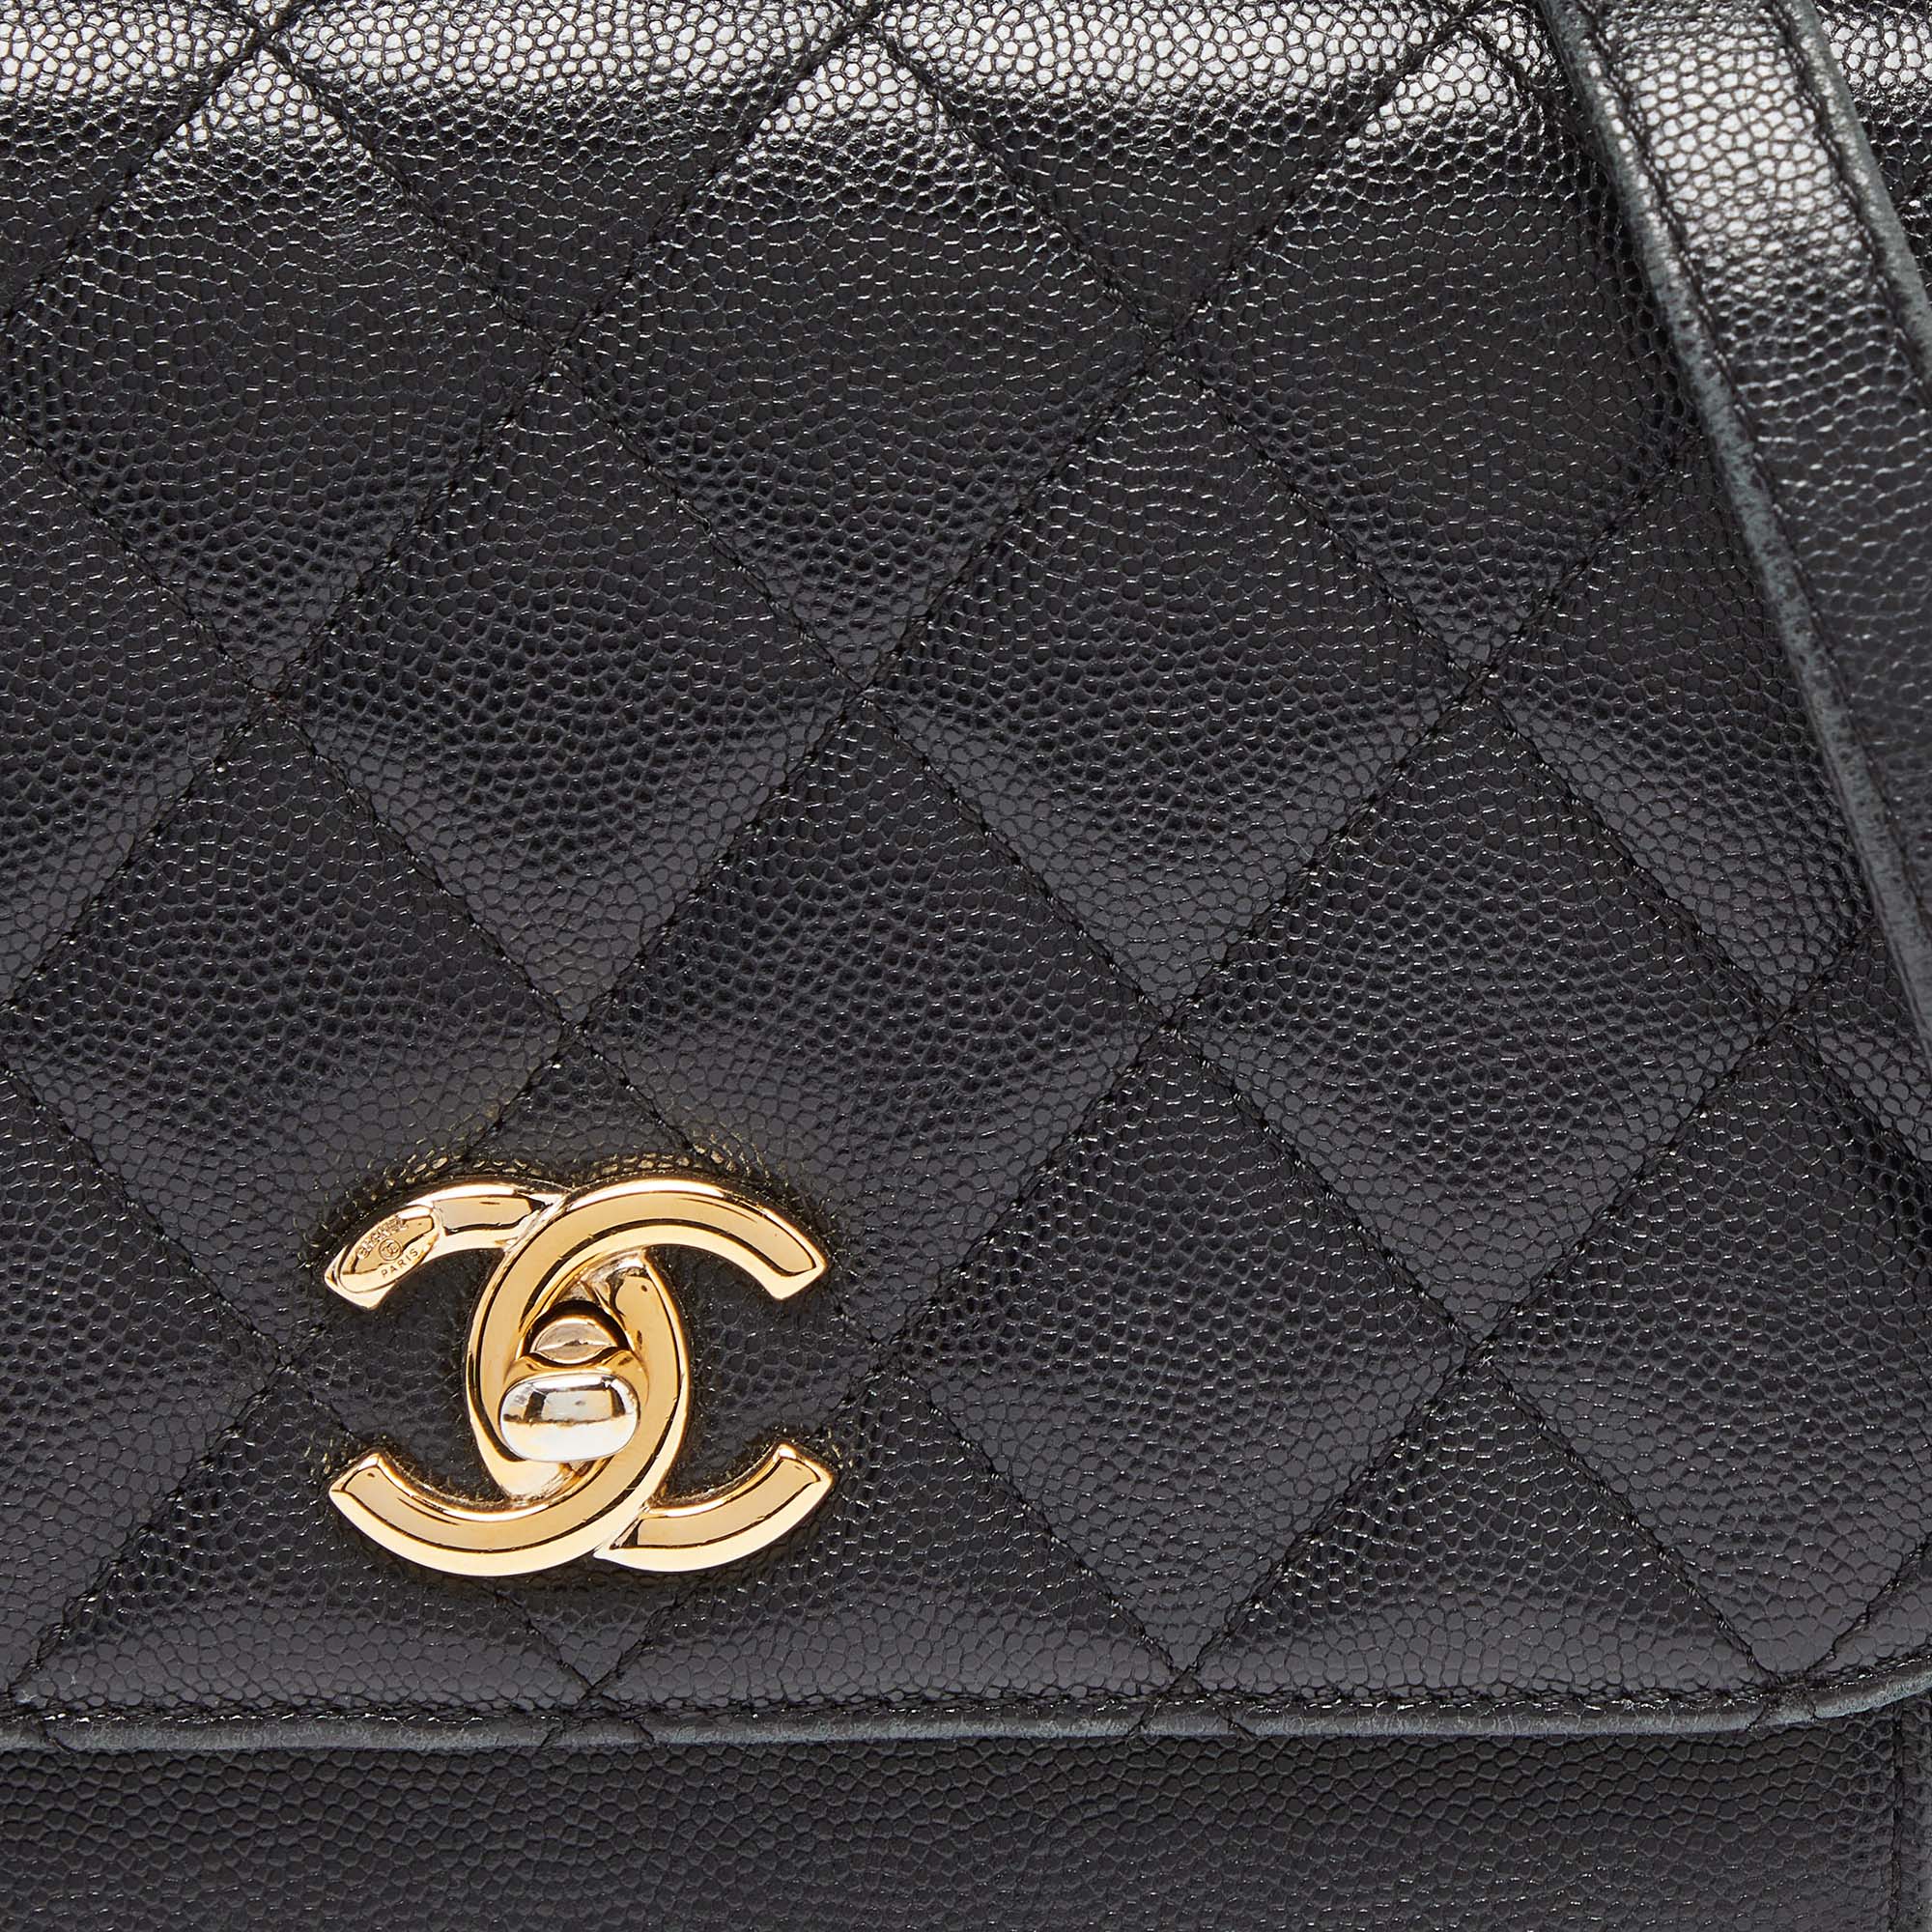 Chanel Black Caviar Leather Business Affinity Chain Flap Bag